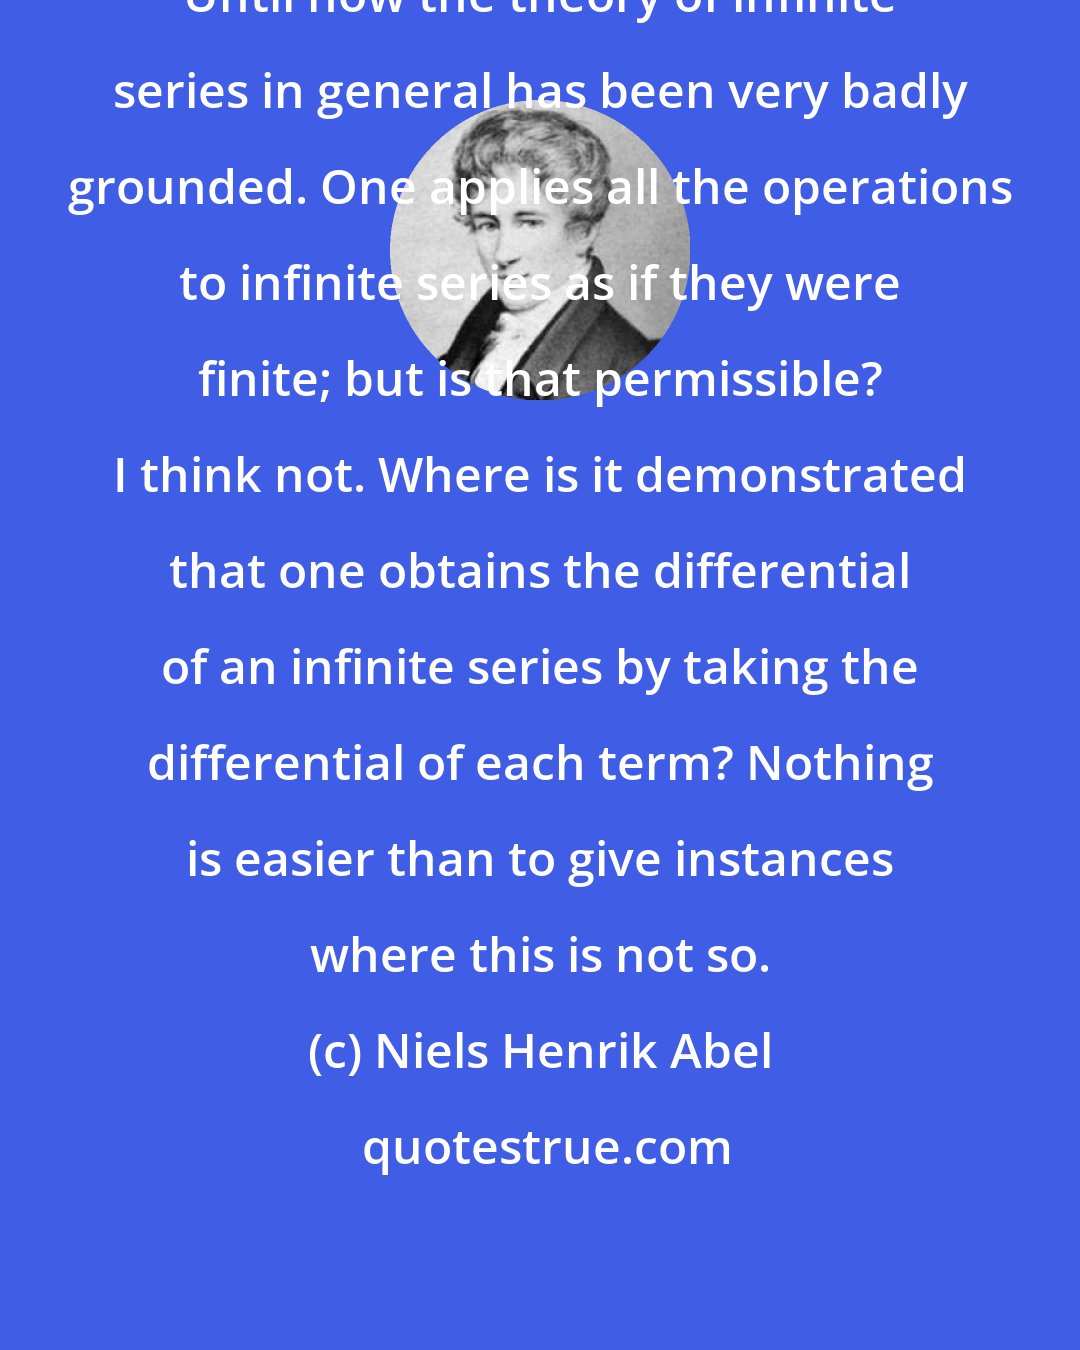 Niels Henrik Abel: Until now the theory of infinite series in general has been very badly grounded. One applies all the operations to infinite series as if they were finite; but is that permissible? I think not. Where is it demonstrated that one obtains the differential of an infinite series by taking the differential of each term? Nothing is easier than to give instances where this is not so.